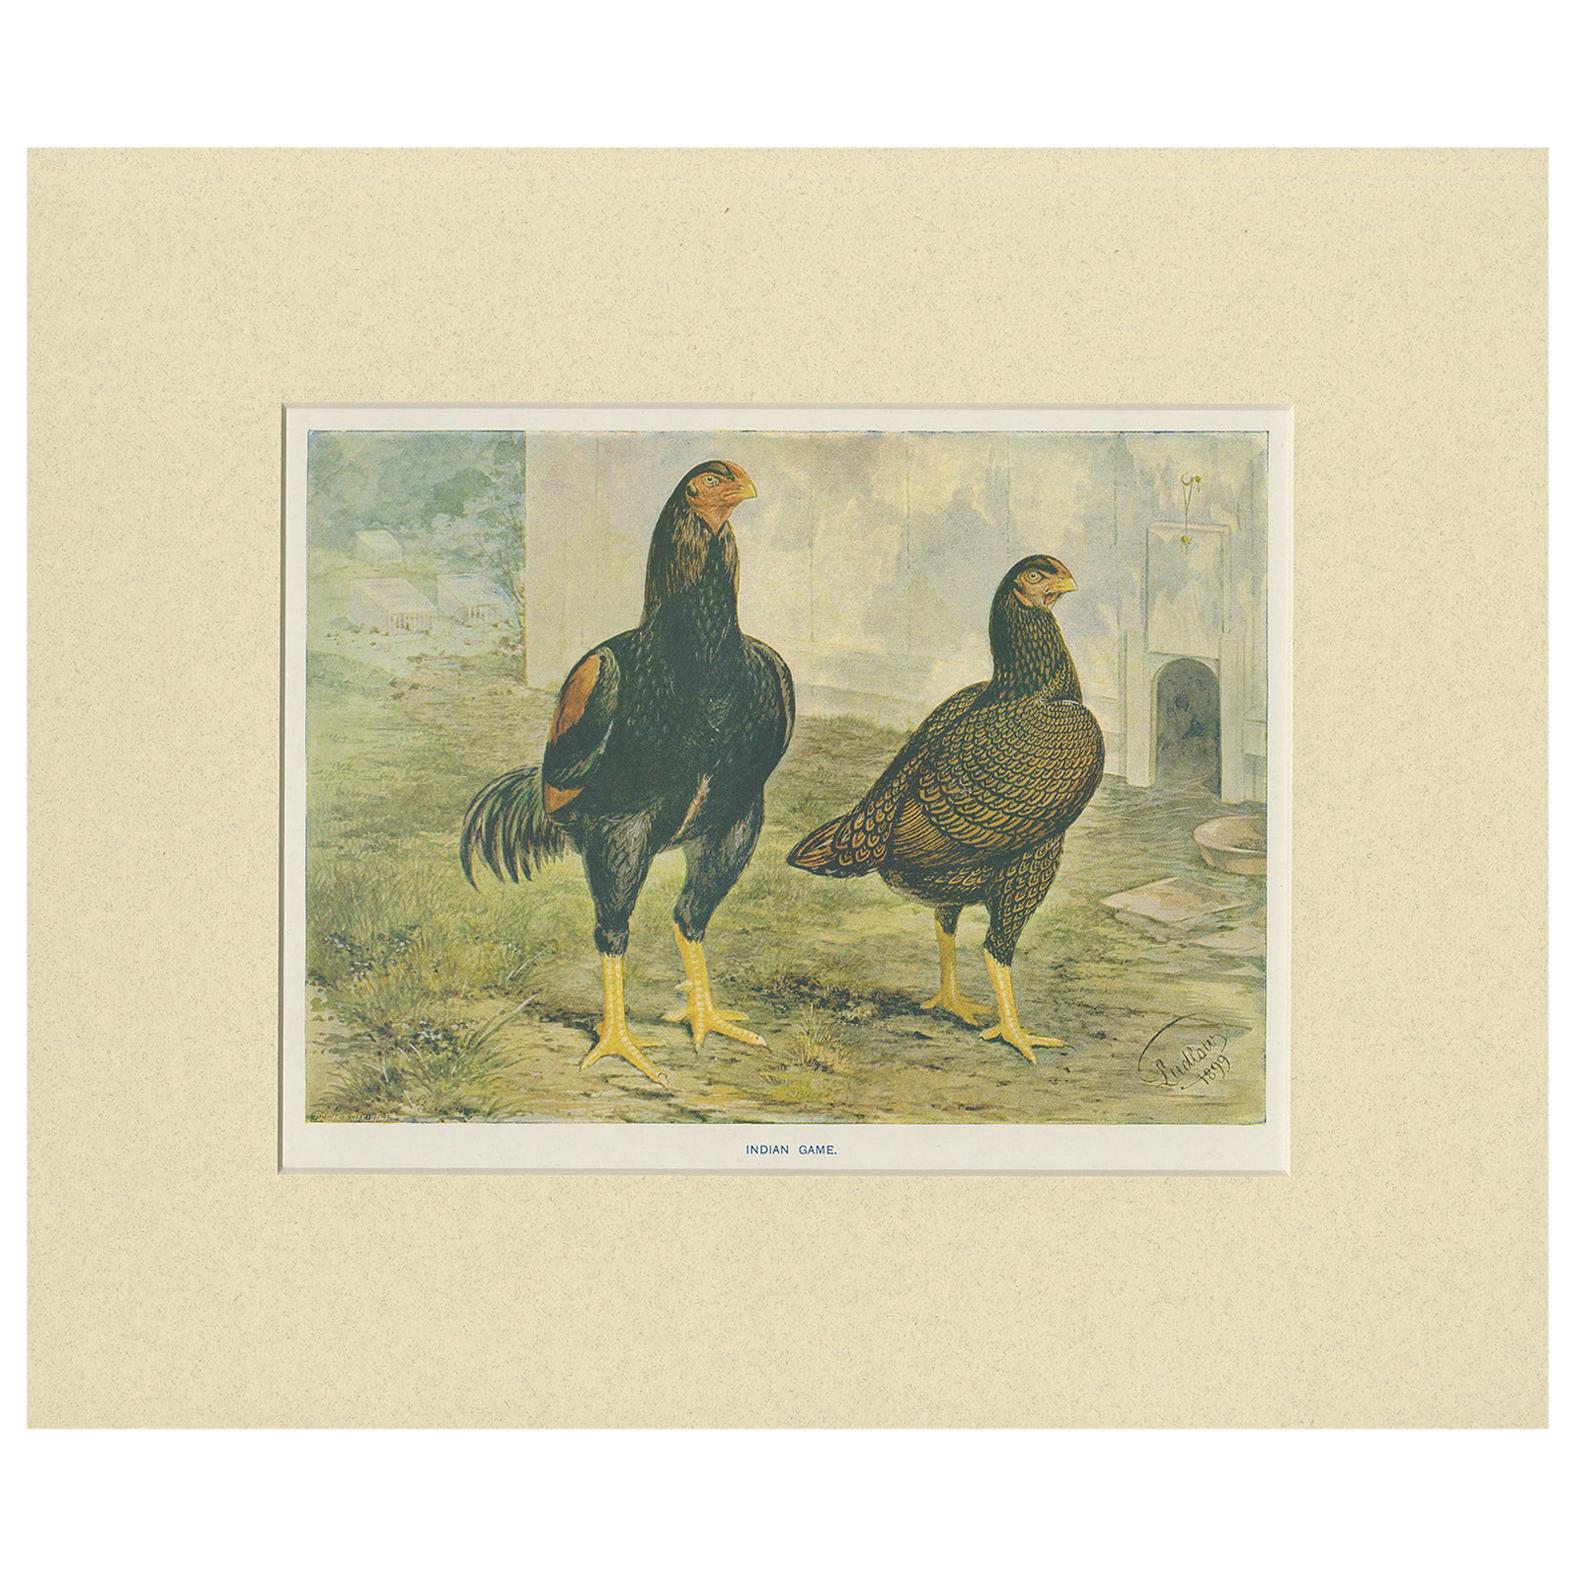 Antique Bird Print of Indian Game Chicken by André & Sleigh, circa 1900